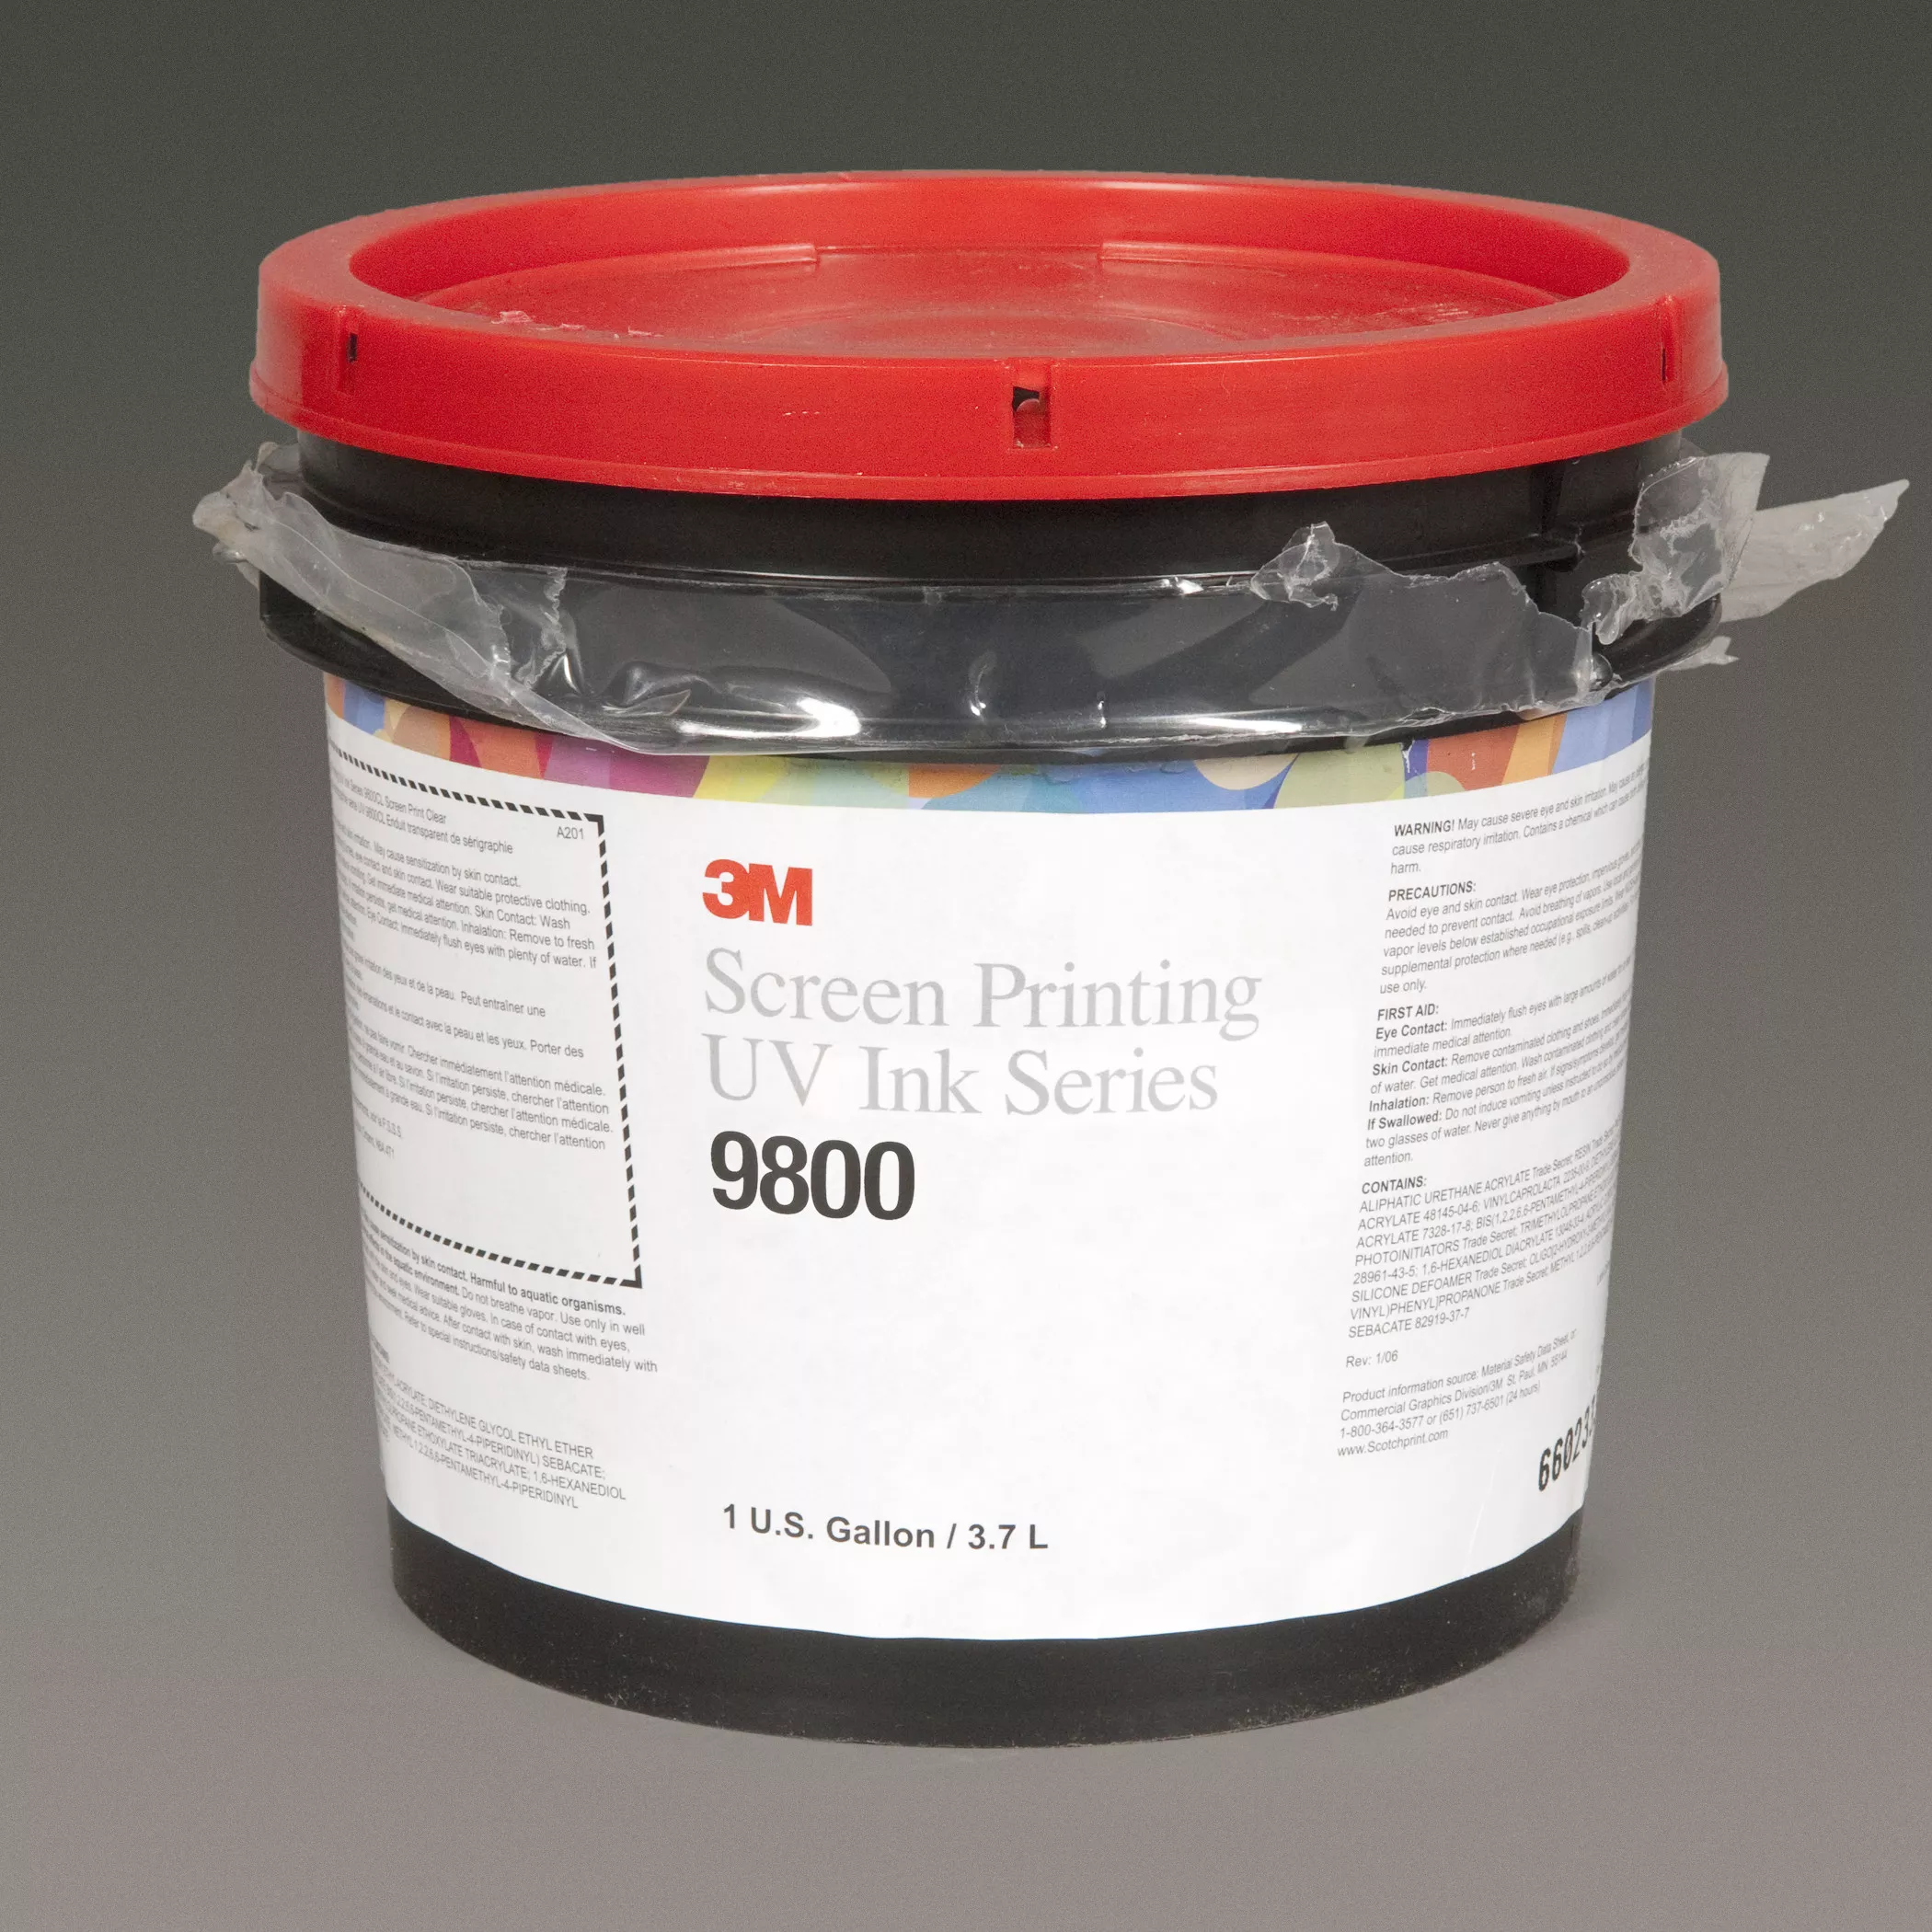 3M™ Screen Printing UV Ink 9800B, Process Base, 1 Gallon Container